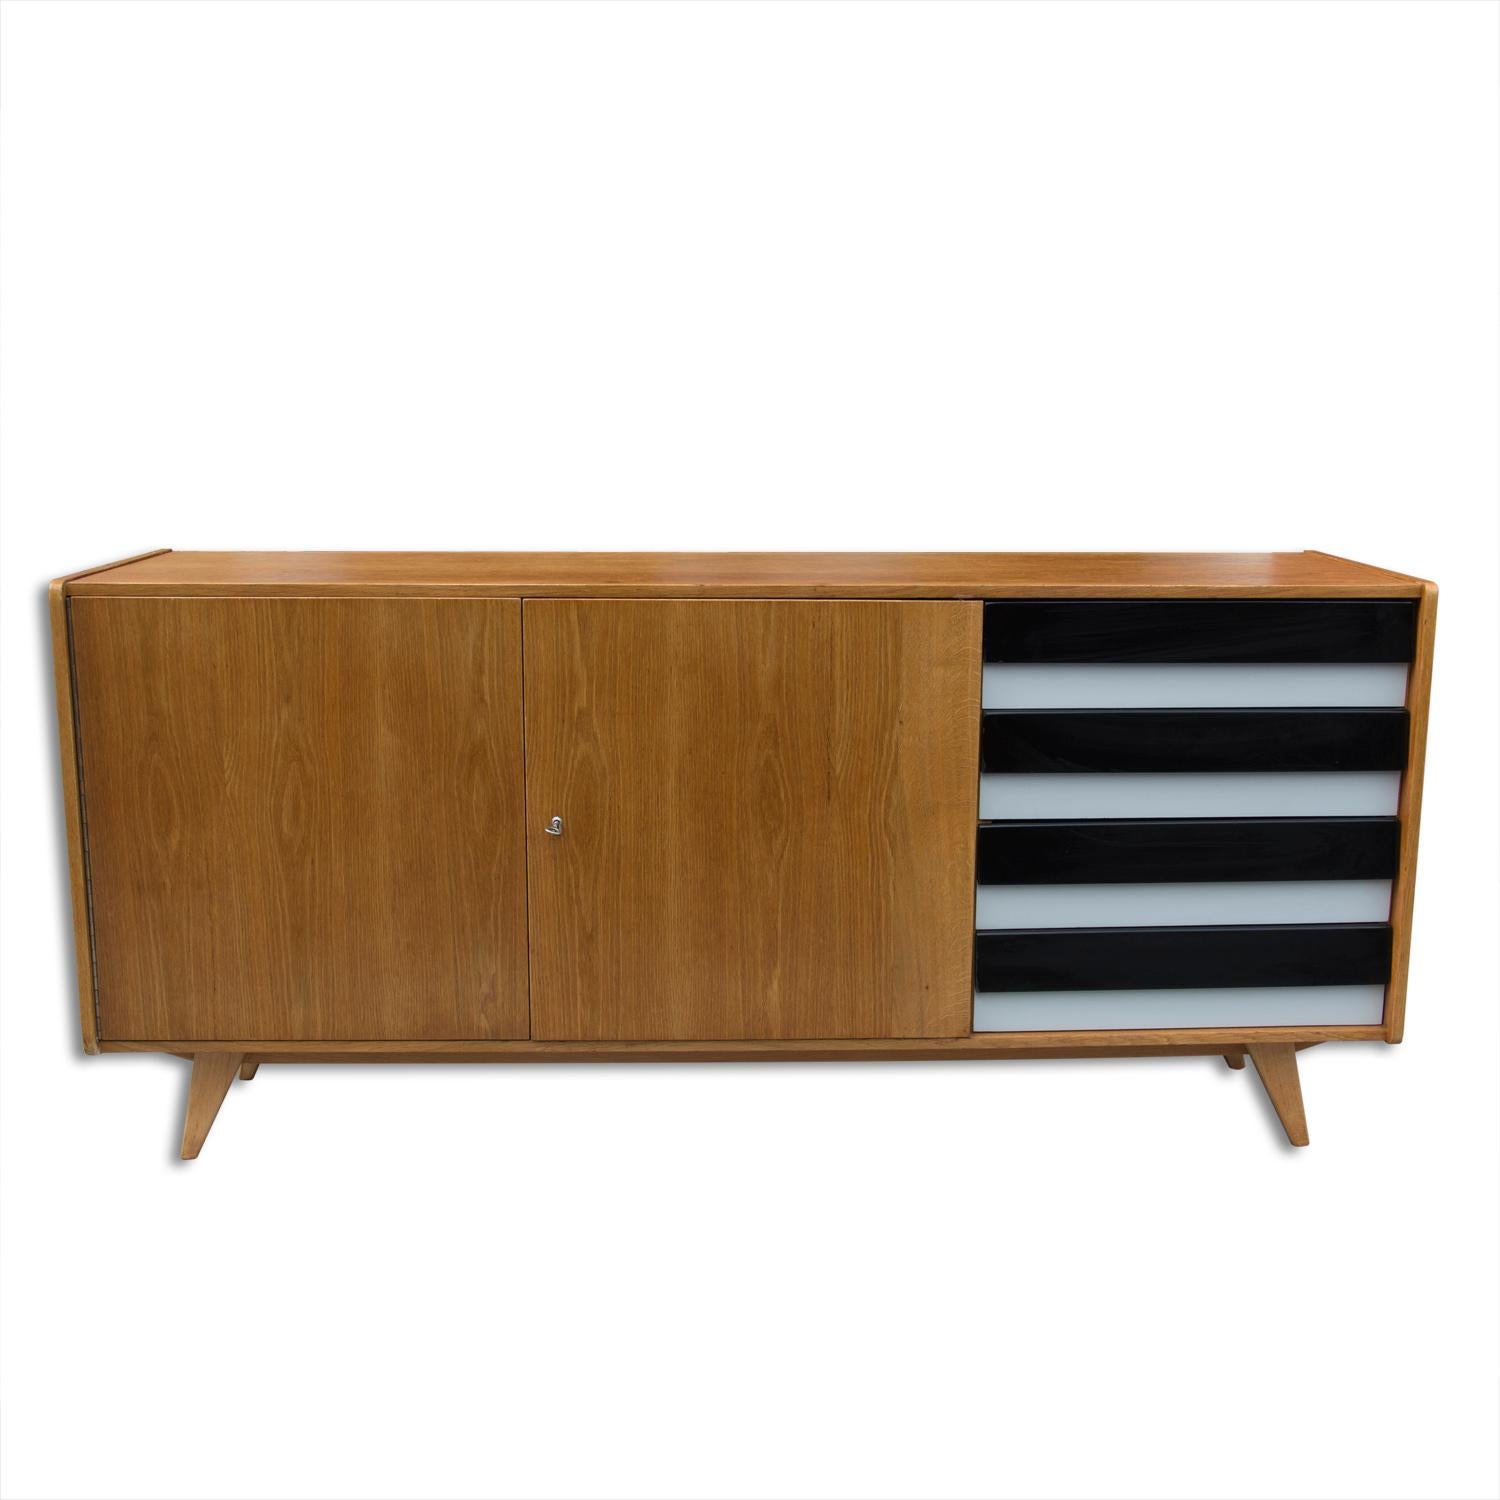 A popular vintage sideboard model U-460 from the 1960´s. It was designed by Jiri Jiroutek for Interier Praha. It features a beech wood, plywood, colored lacquered drawers. In excellent condition, fully refurbished.
  